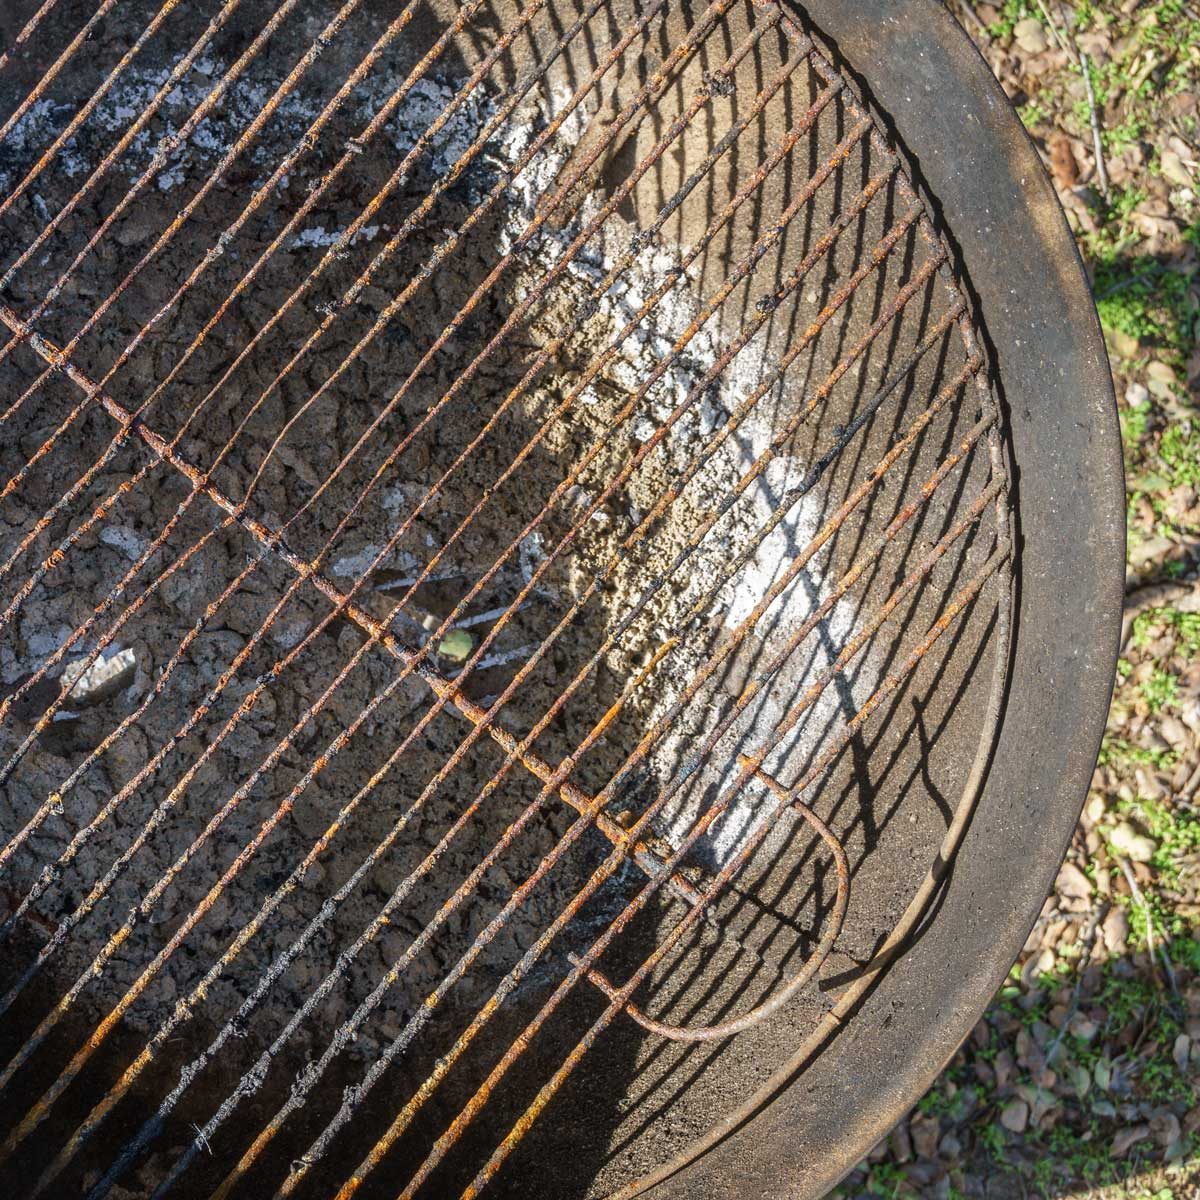 https://www.familyhandyman.com/wp-content/uploads/2020/02/charcoal-grill-GettyImages-917929322.jpg?fit=700%2C700